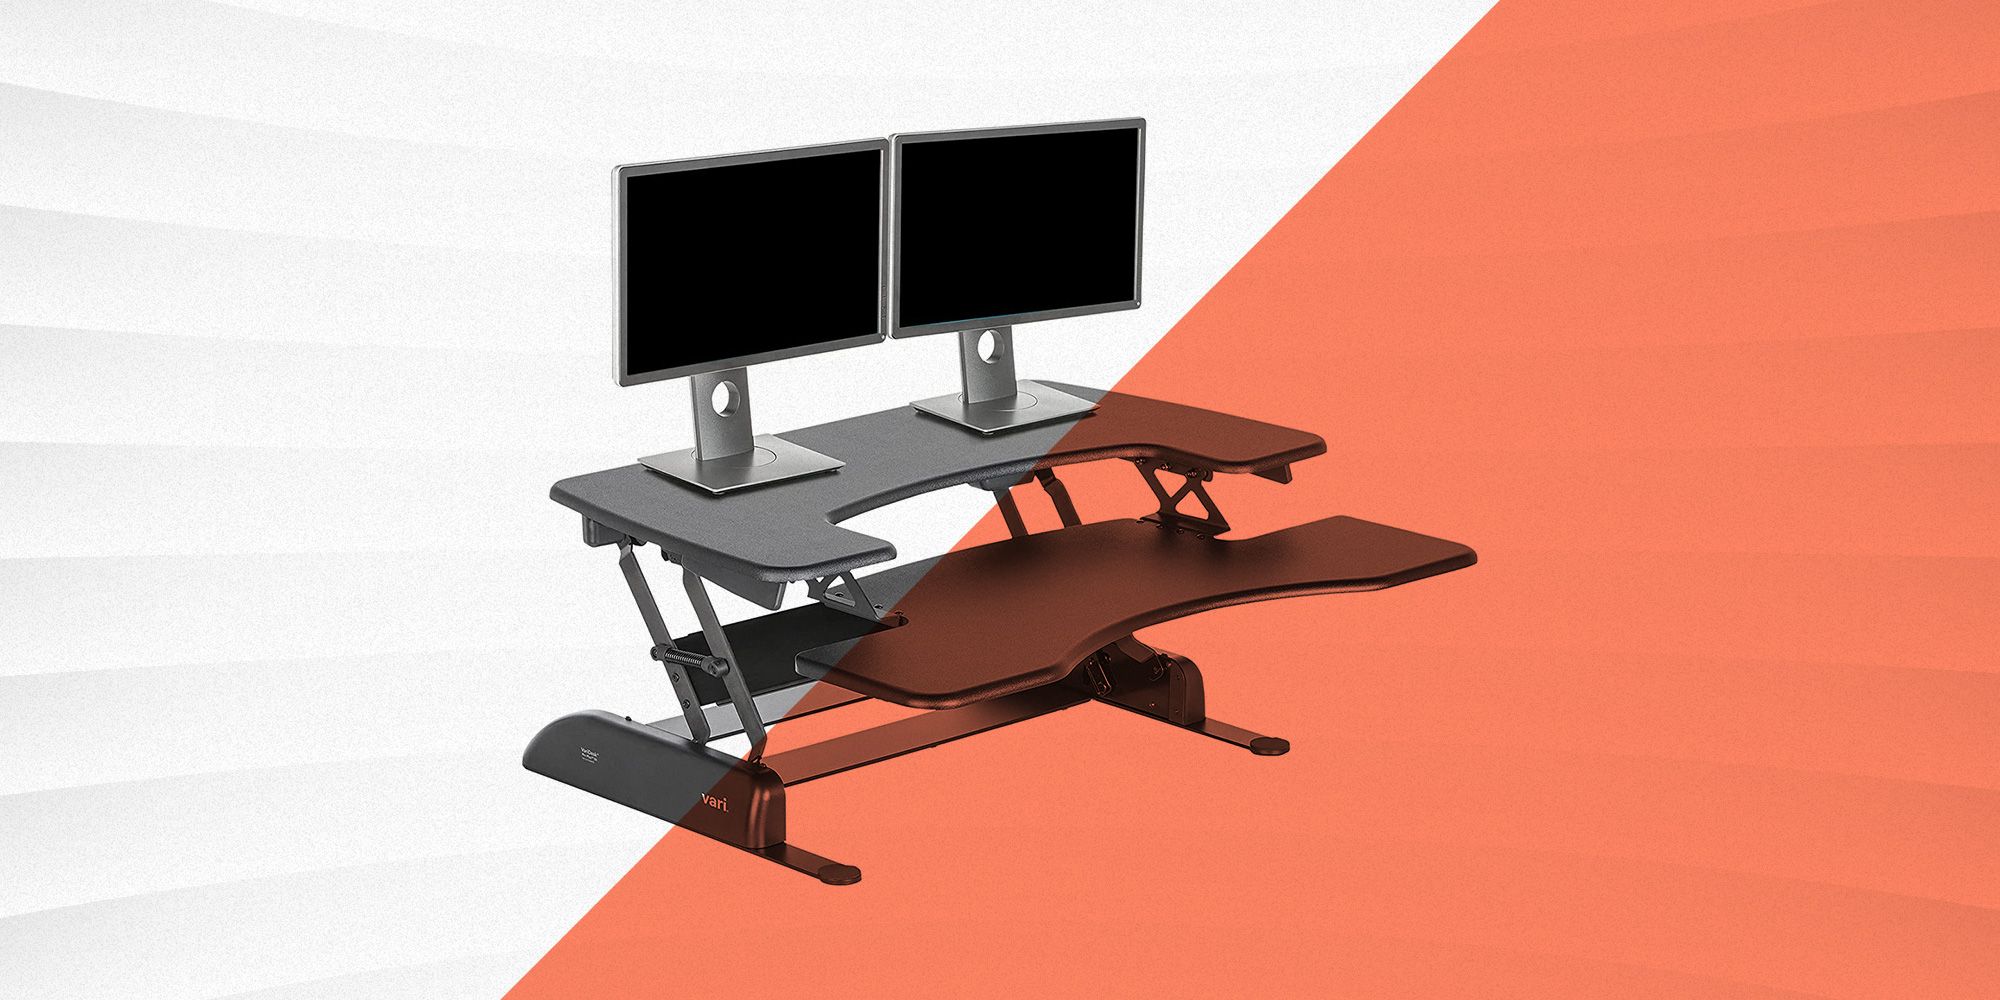 Cord Management for Standing Desk - Cable Management Solutions - Testing  MojoDesk